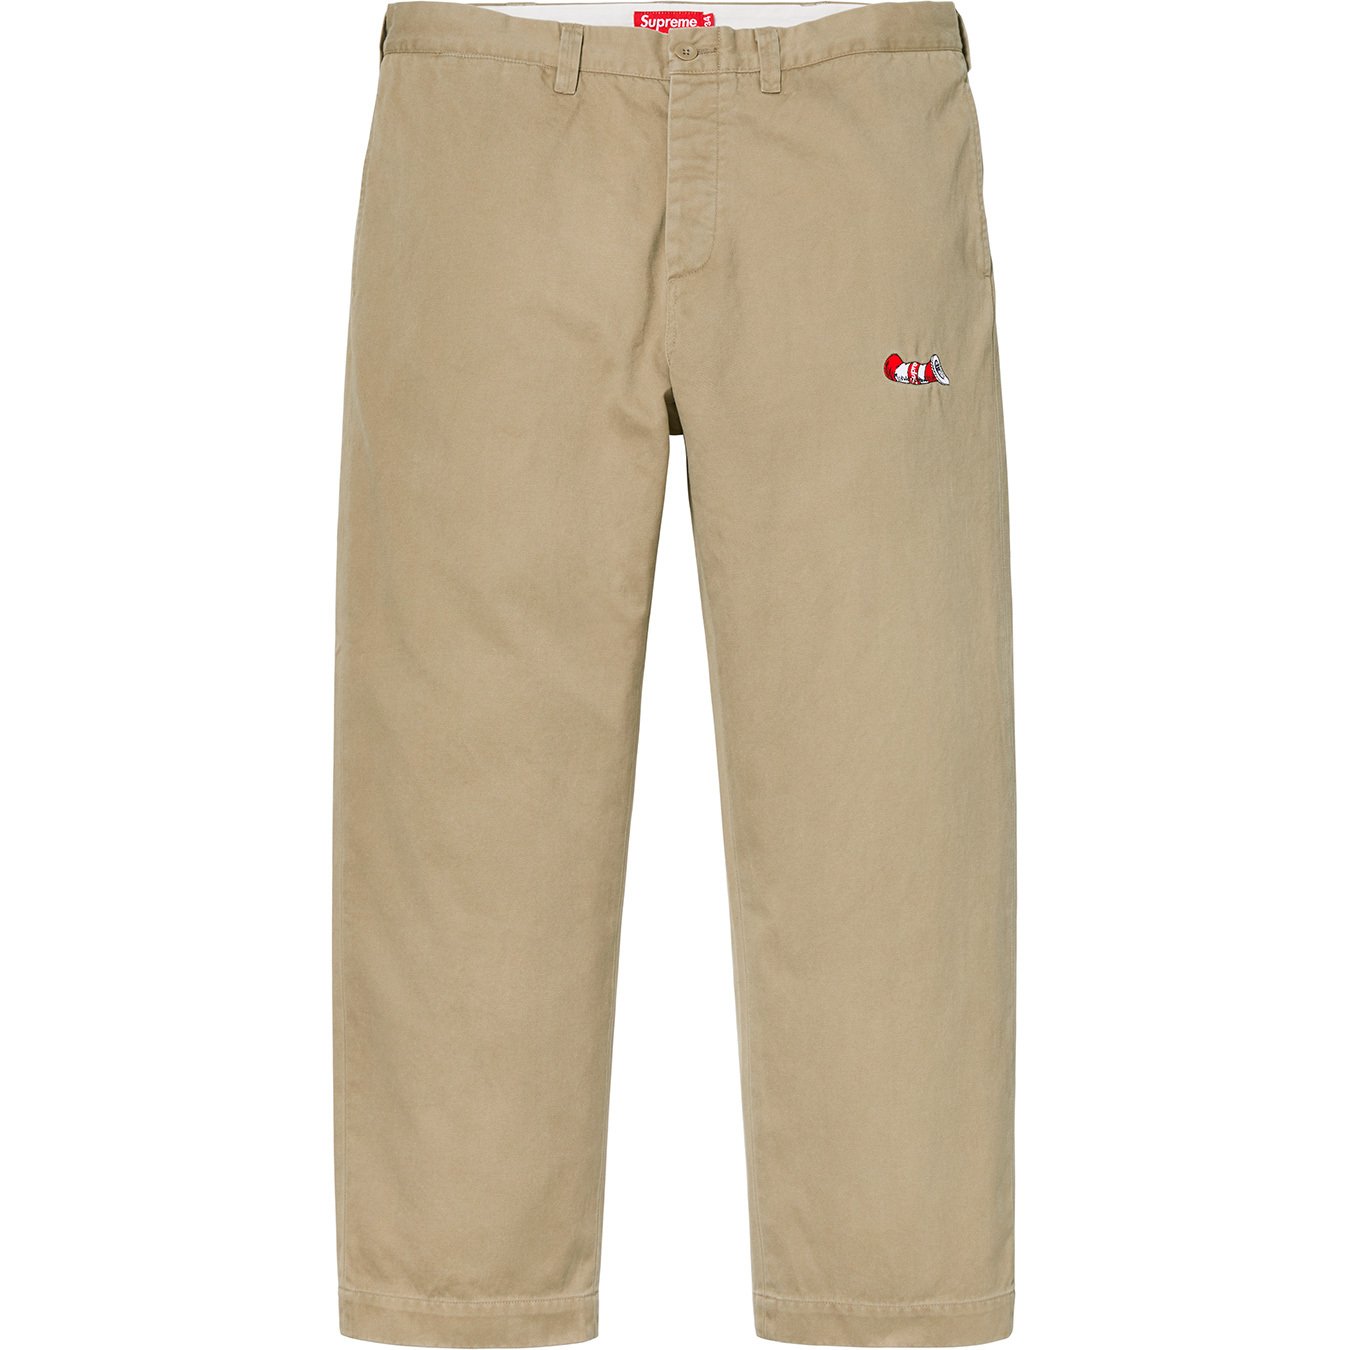 Cat in the Hat Chino Pant - Supreme Community